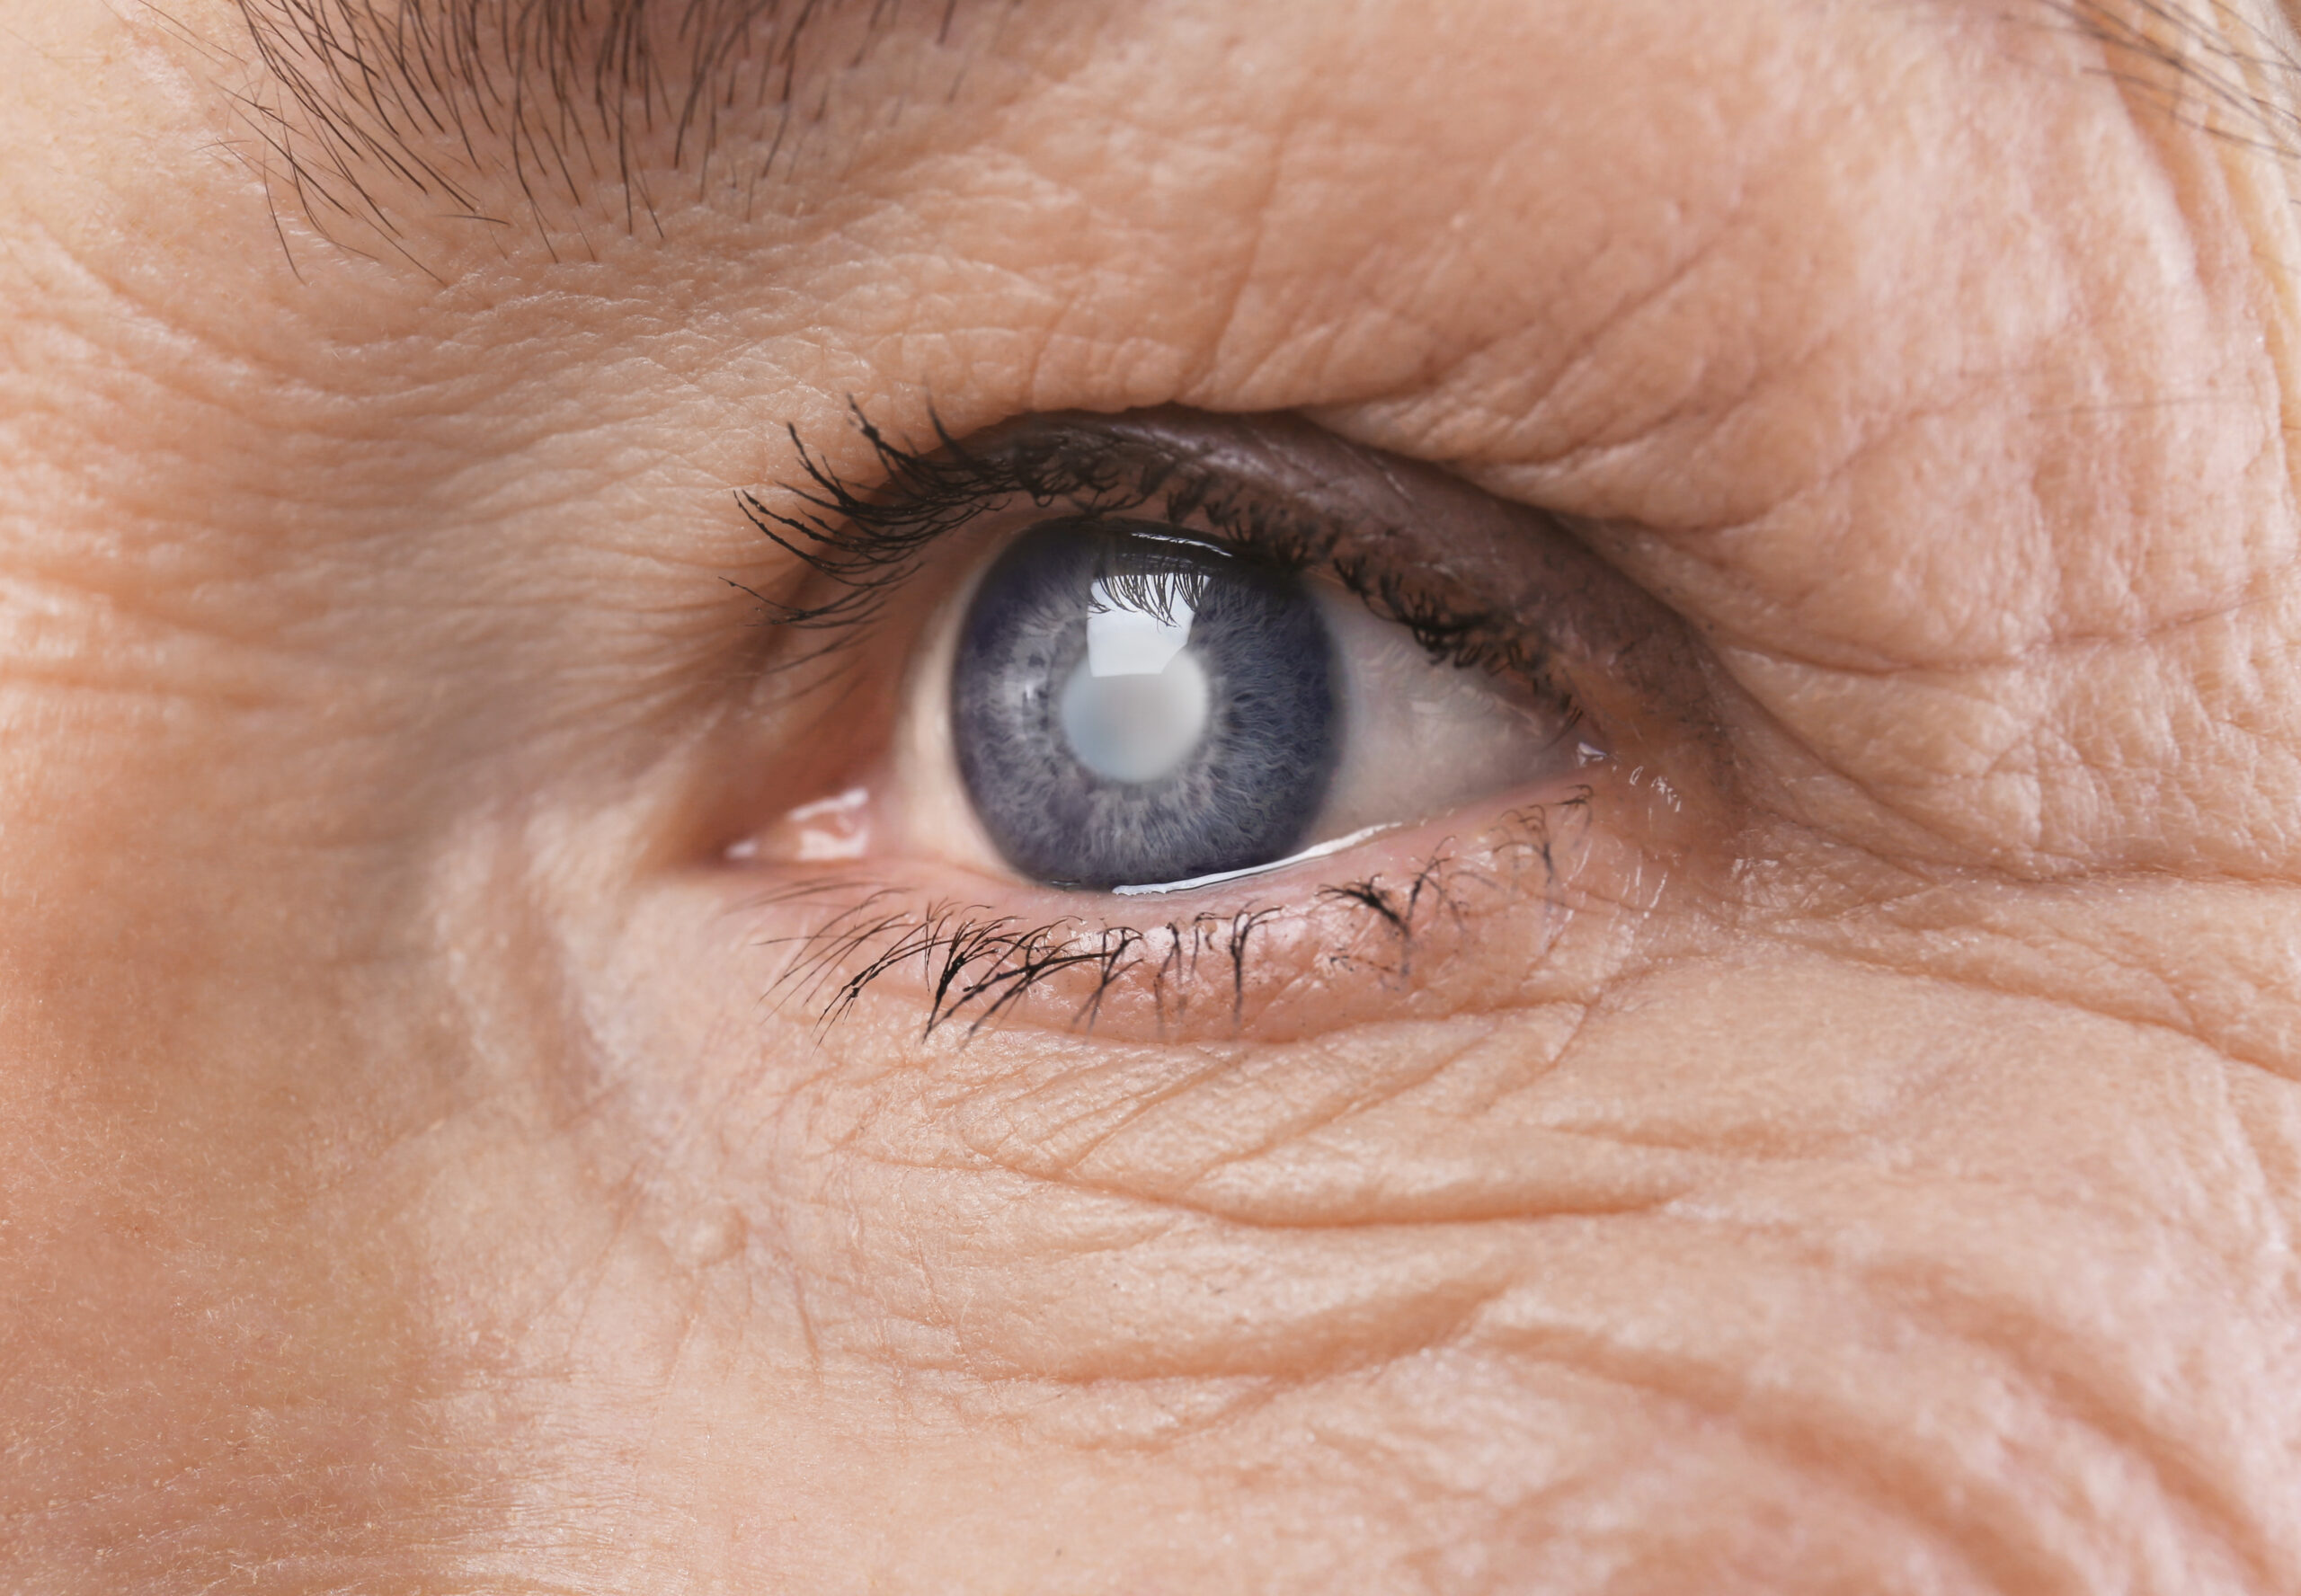 Cataract: What Is, Causes, Types, Symptoms, Diagnosis, and Treatment